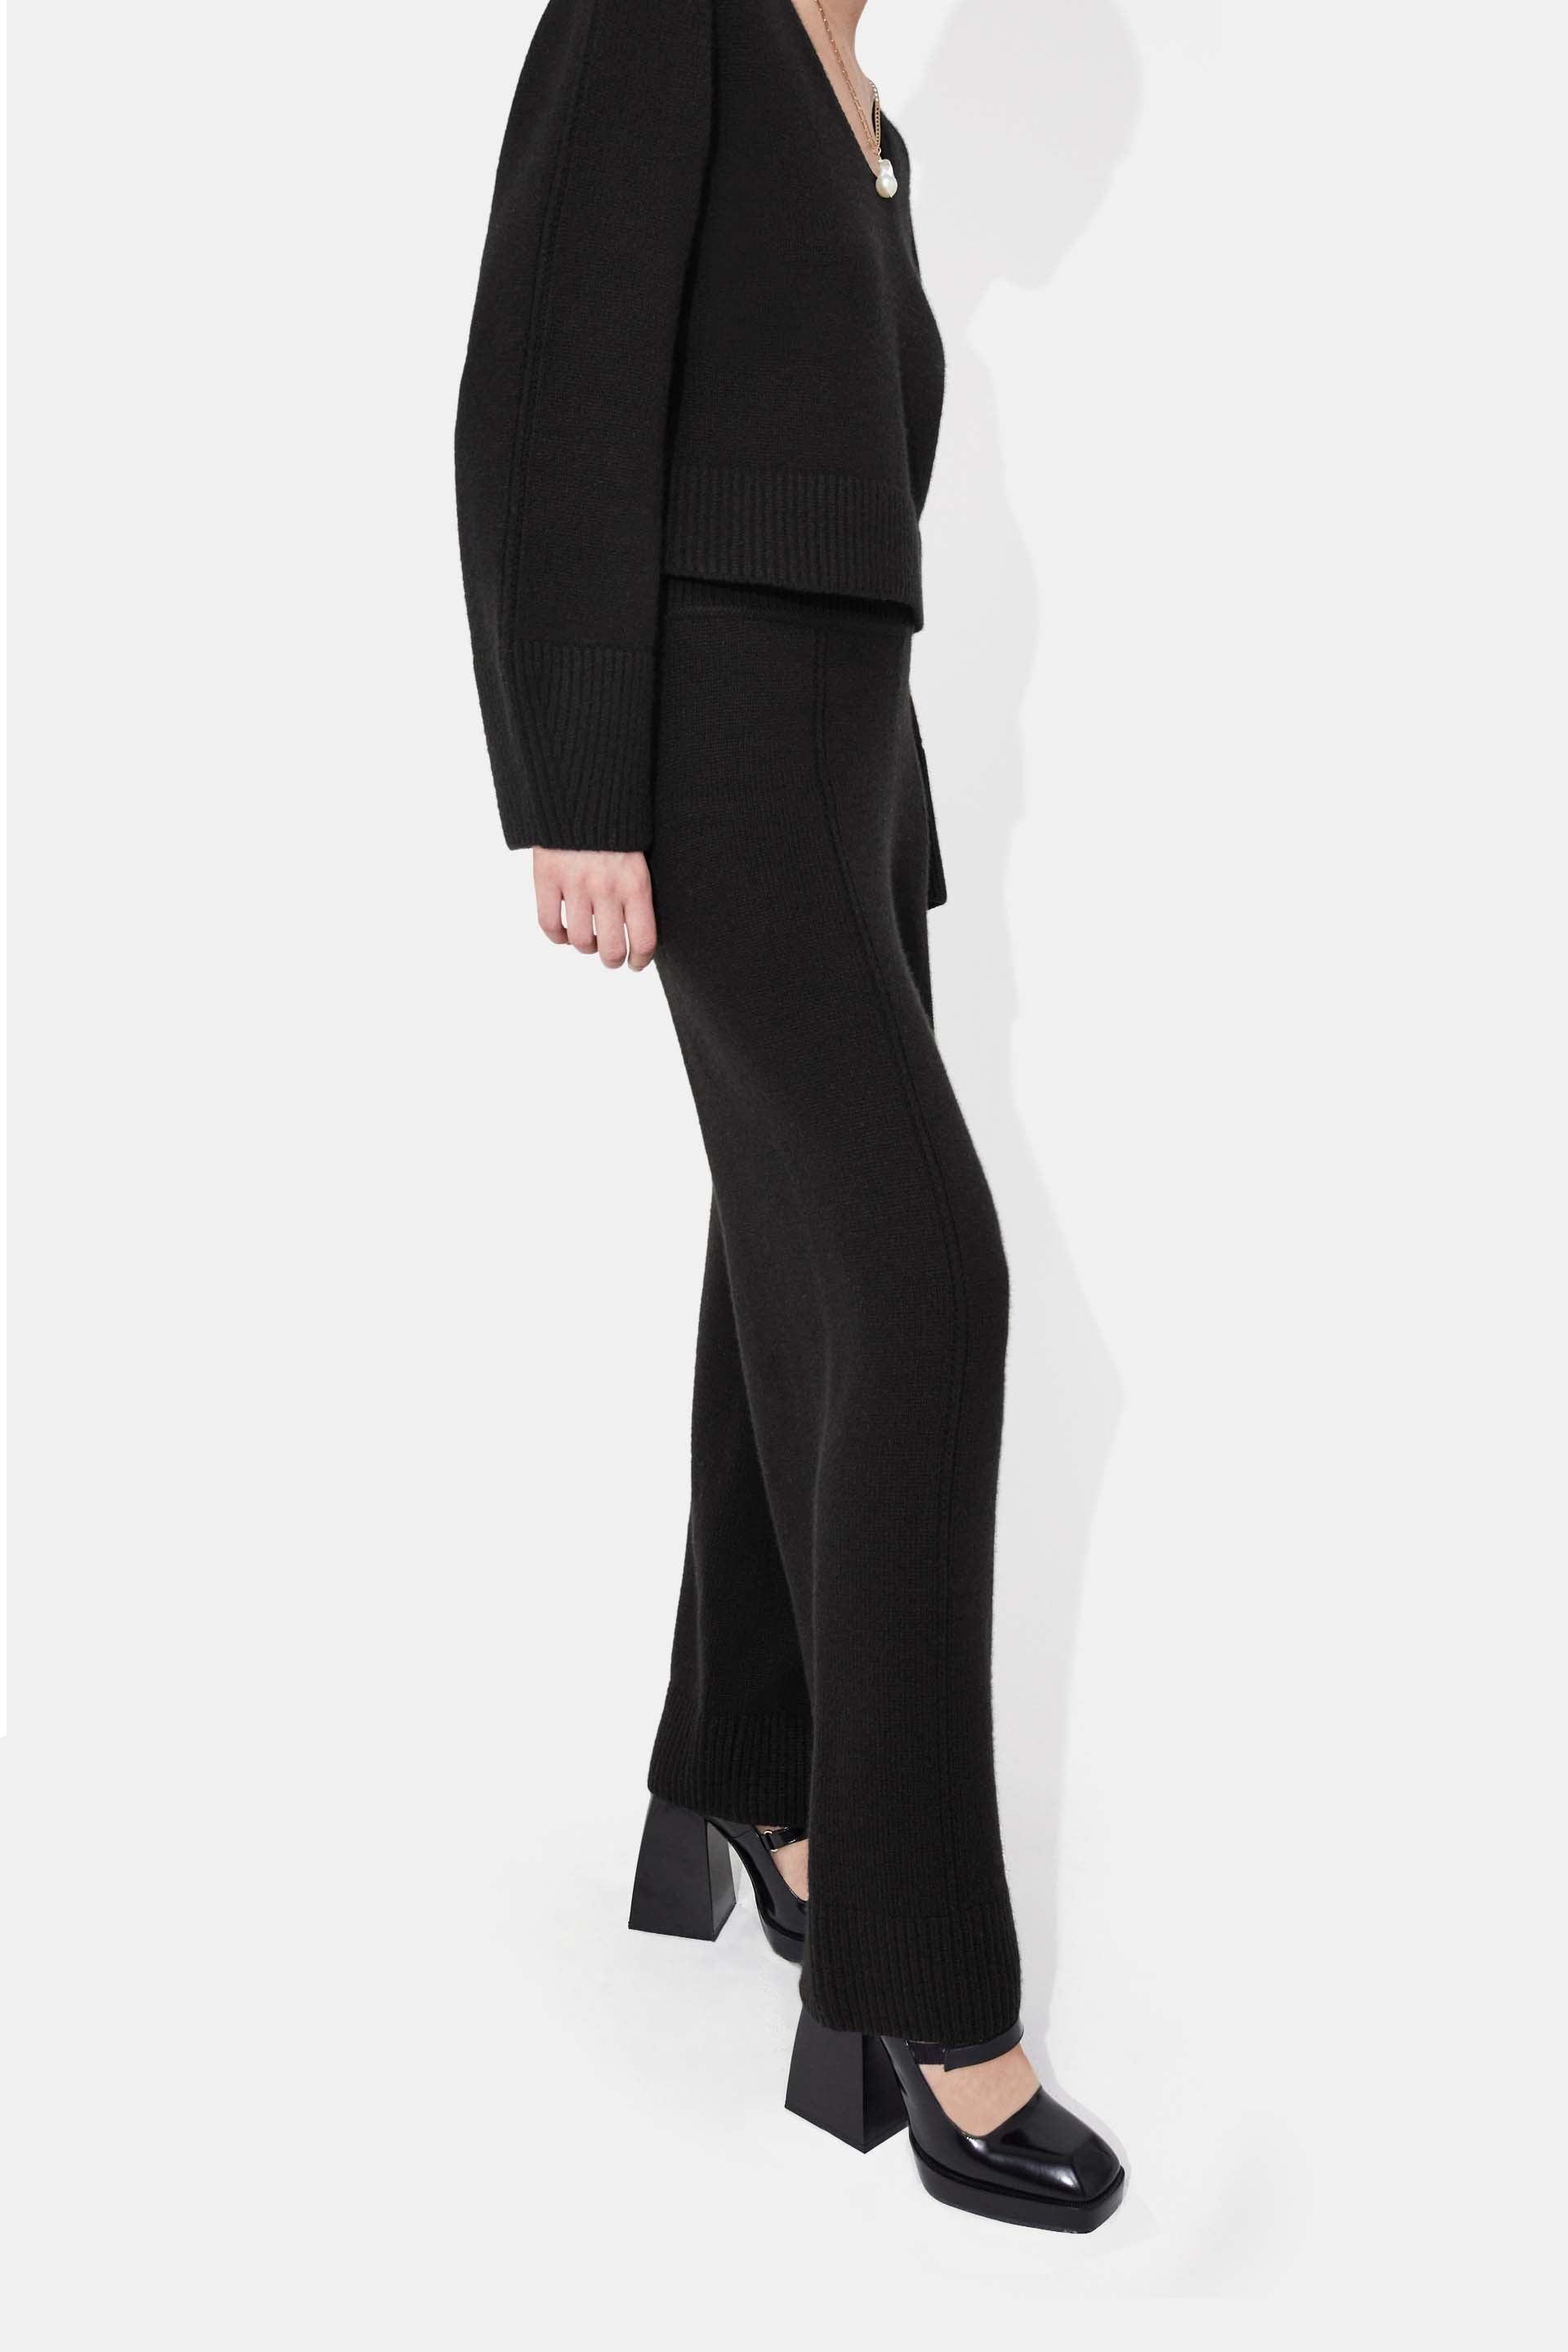 Slacks and Chinos Wide-leg and palazzo trousers Womens Clothing Trousers Galvan London UK Theia Cashmere Trousers in Black 